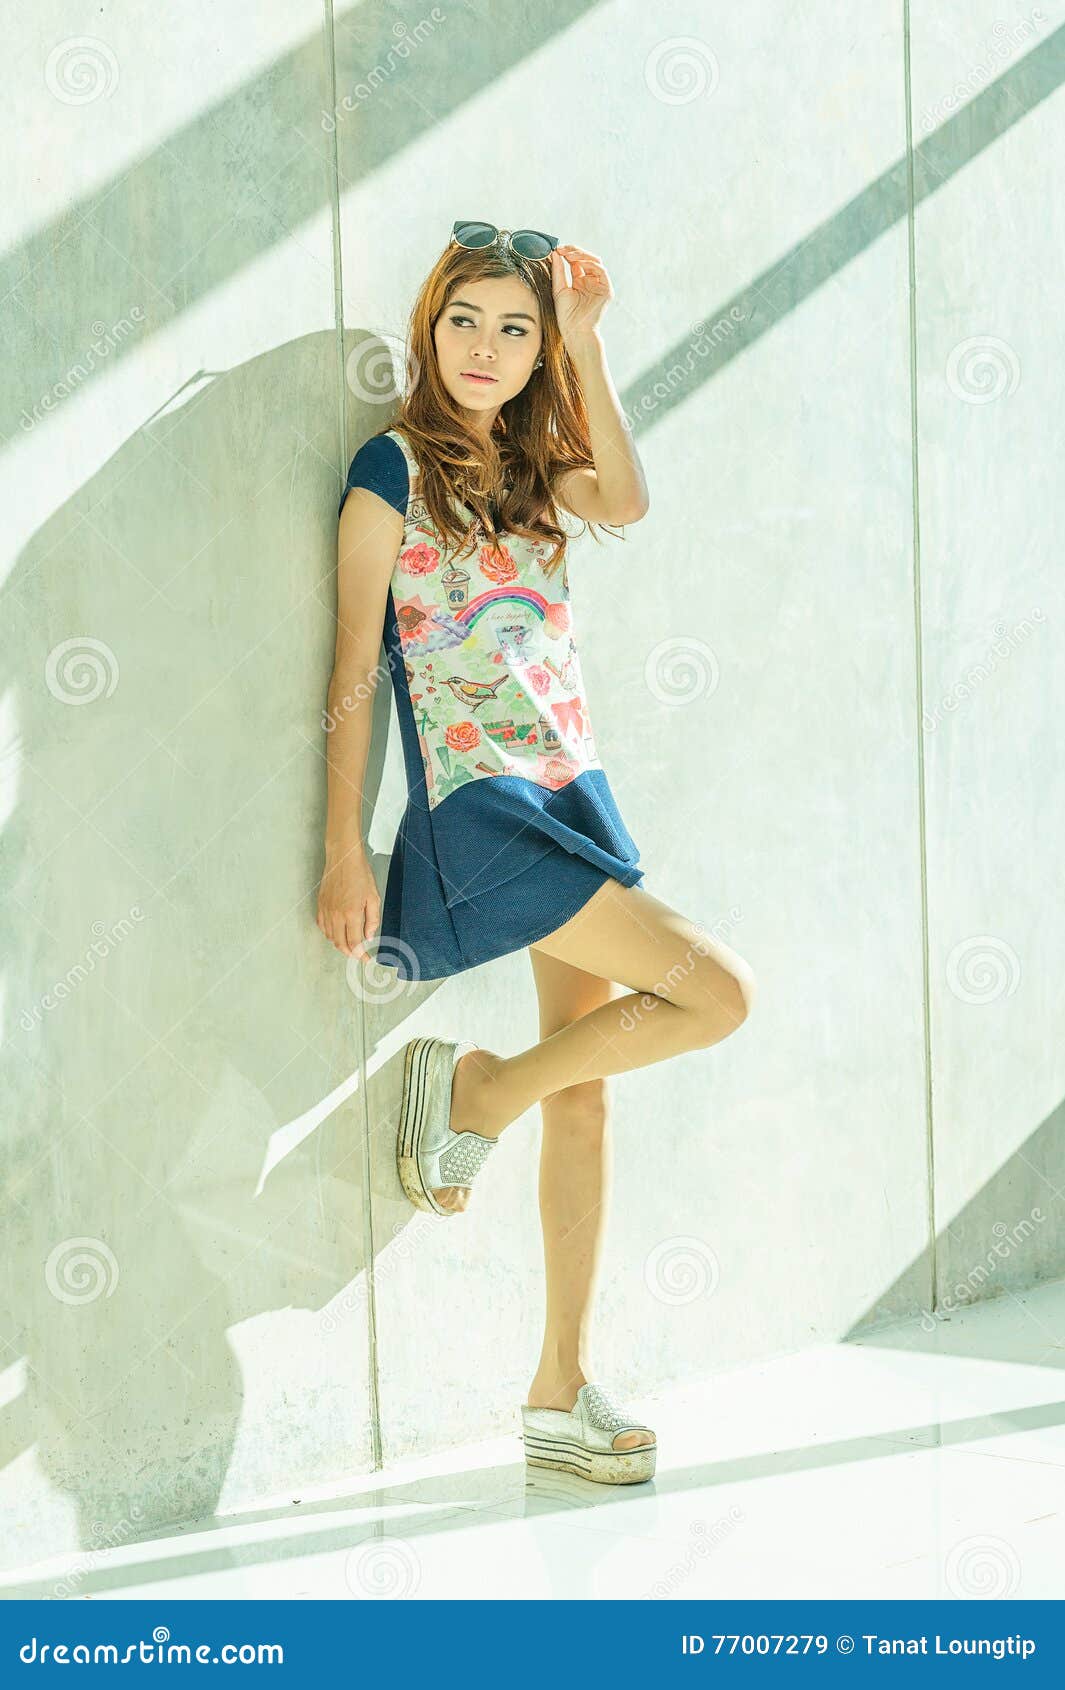 Fashion Portrait of Young Model Posing by the Wall Stock Image - Image ...